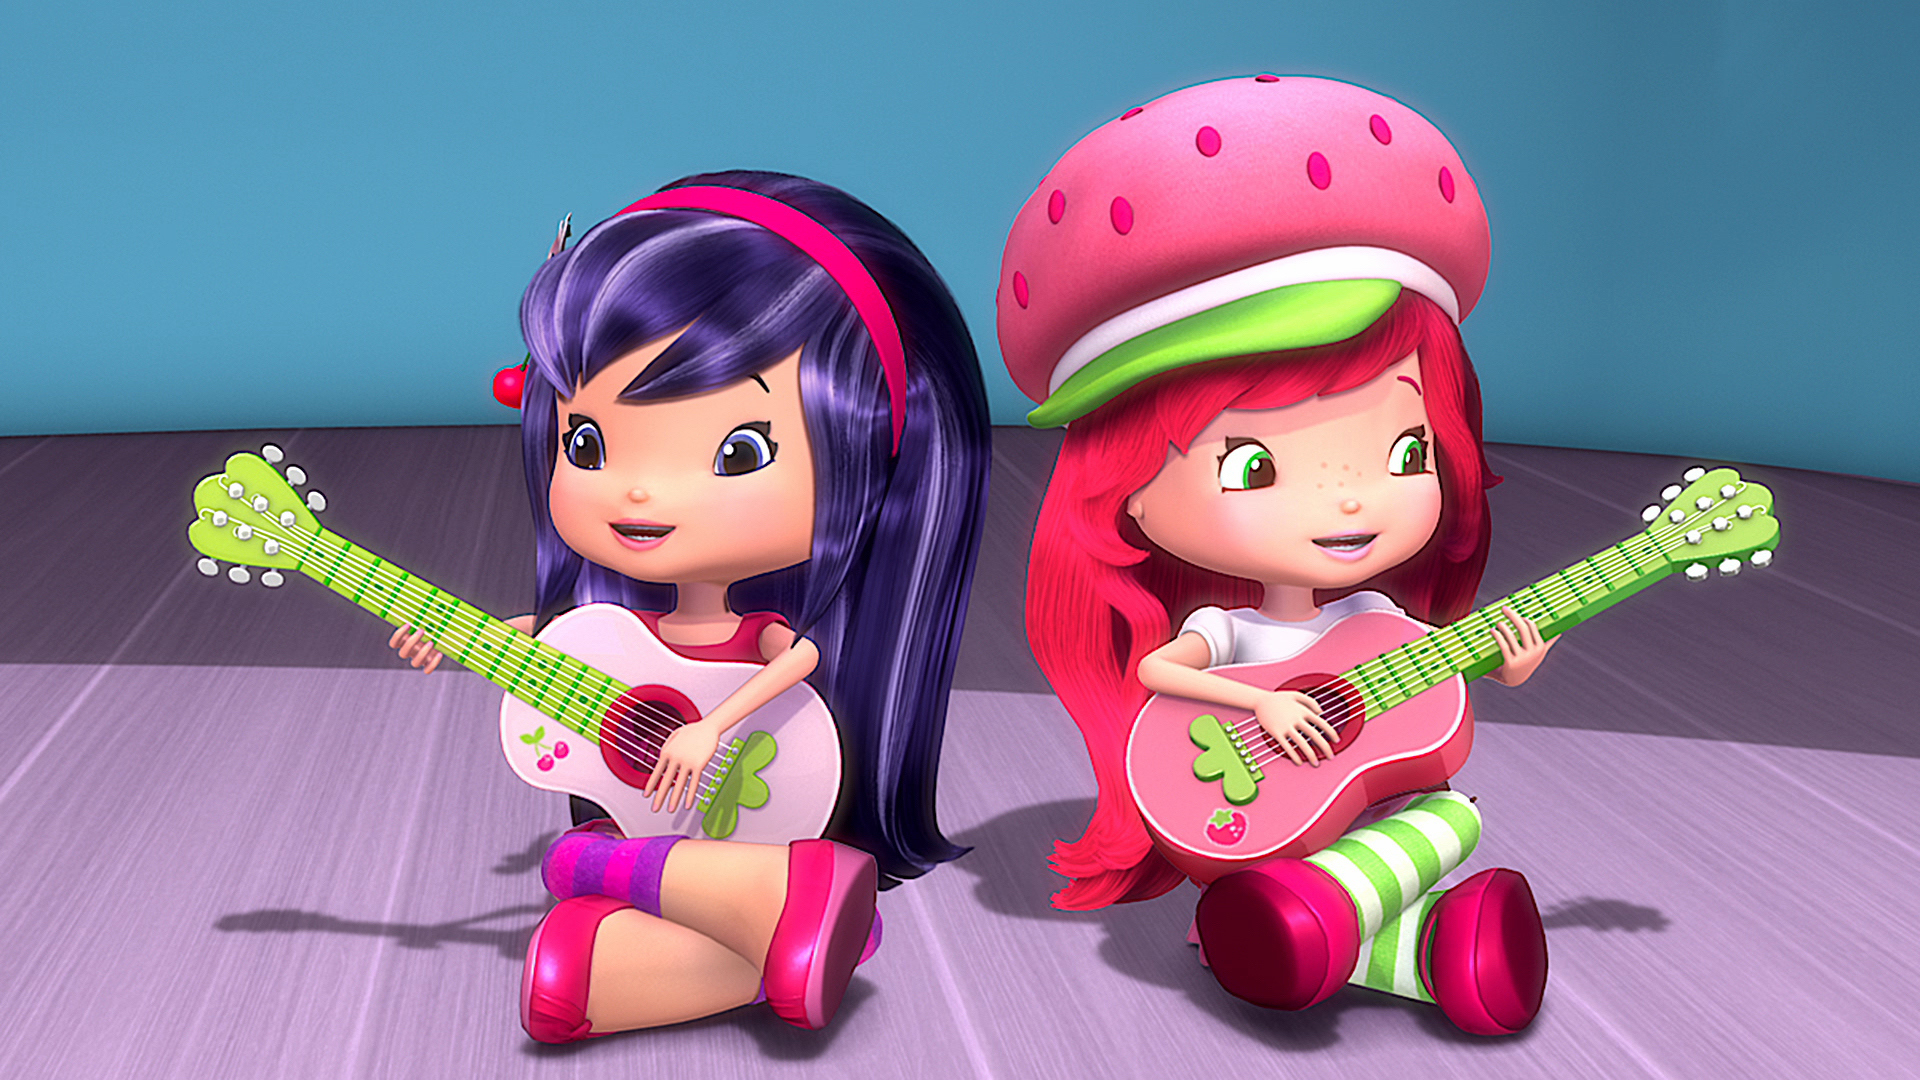 which company created the character strawberry shortcake